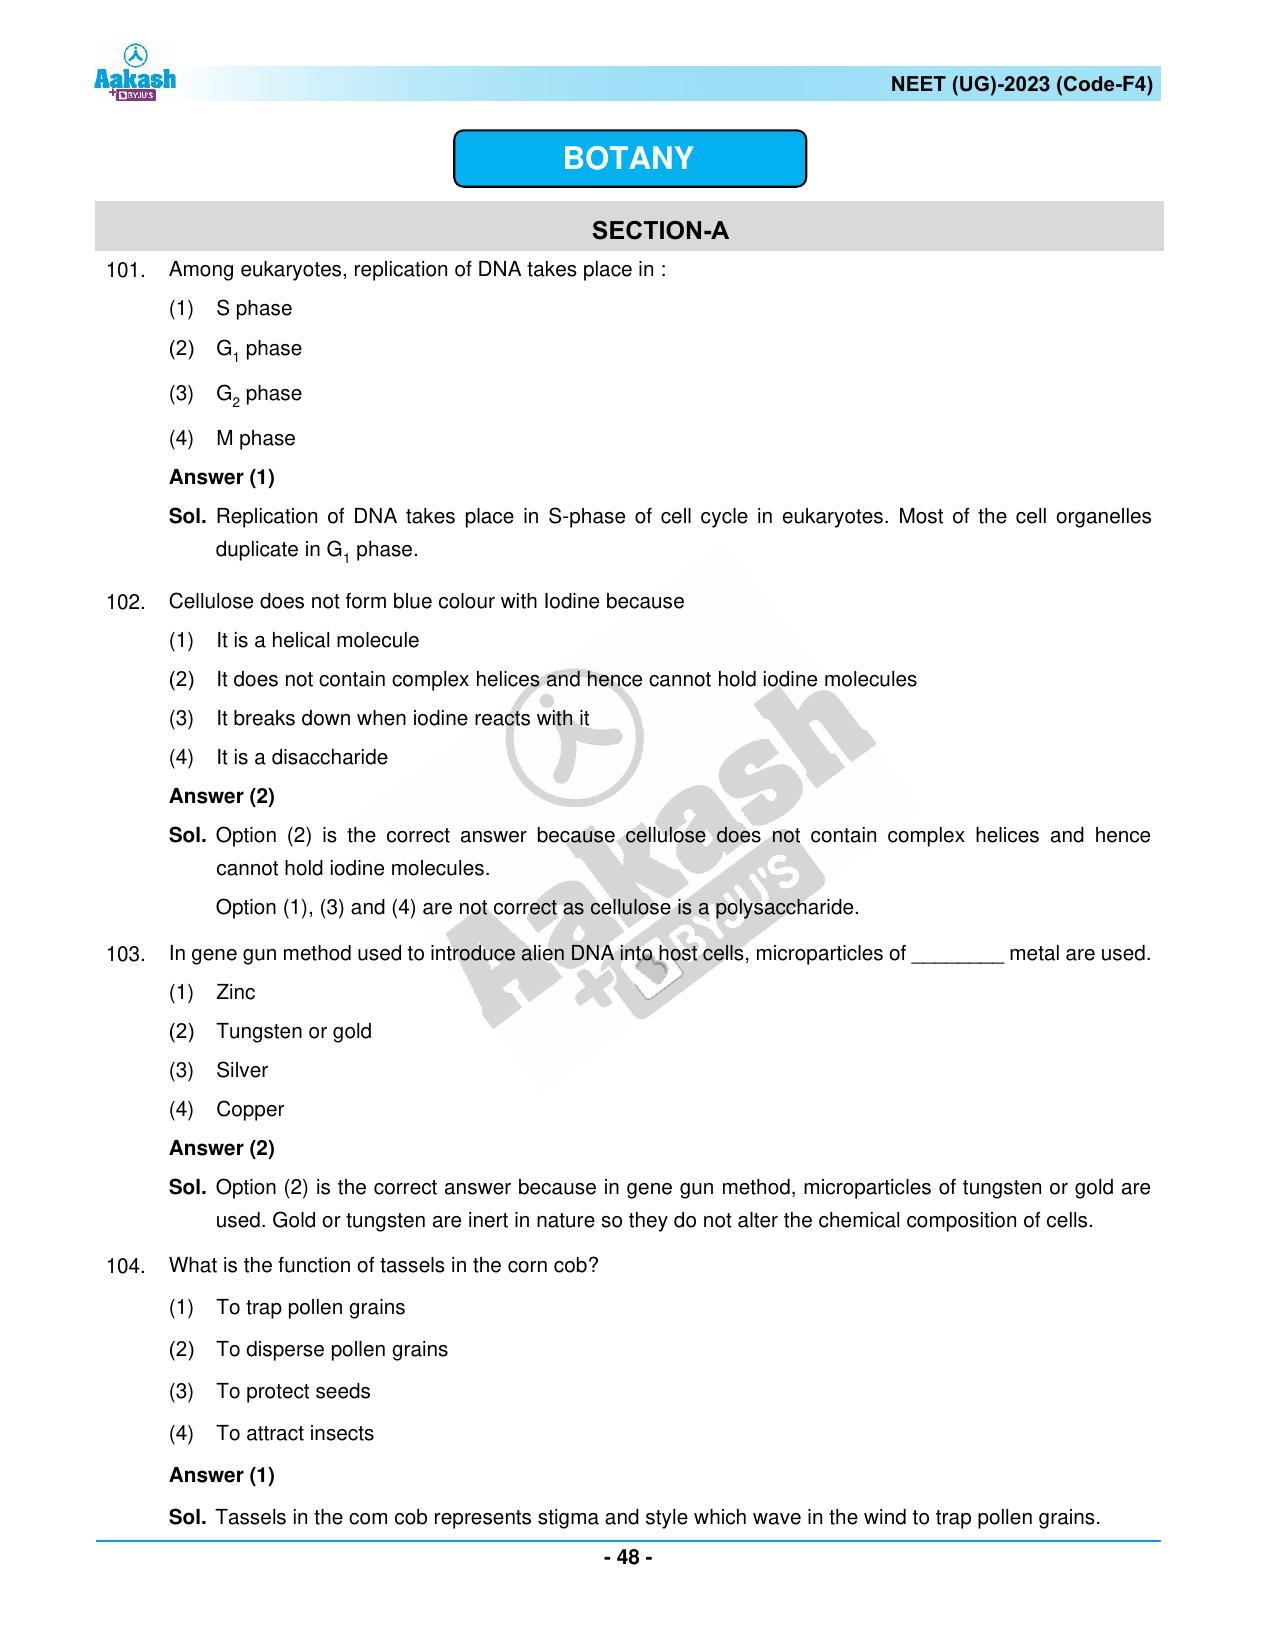 NEET 2023 Question Paper F4 - Page 48